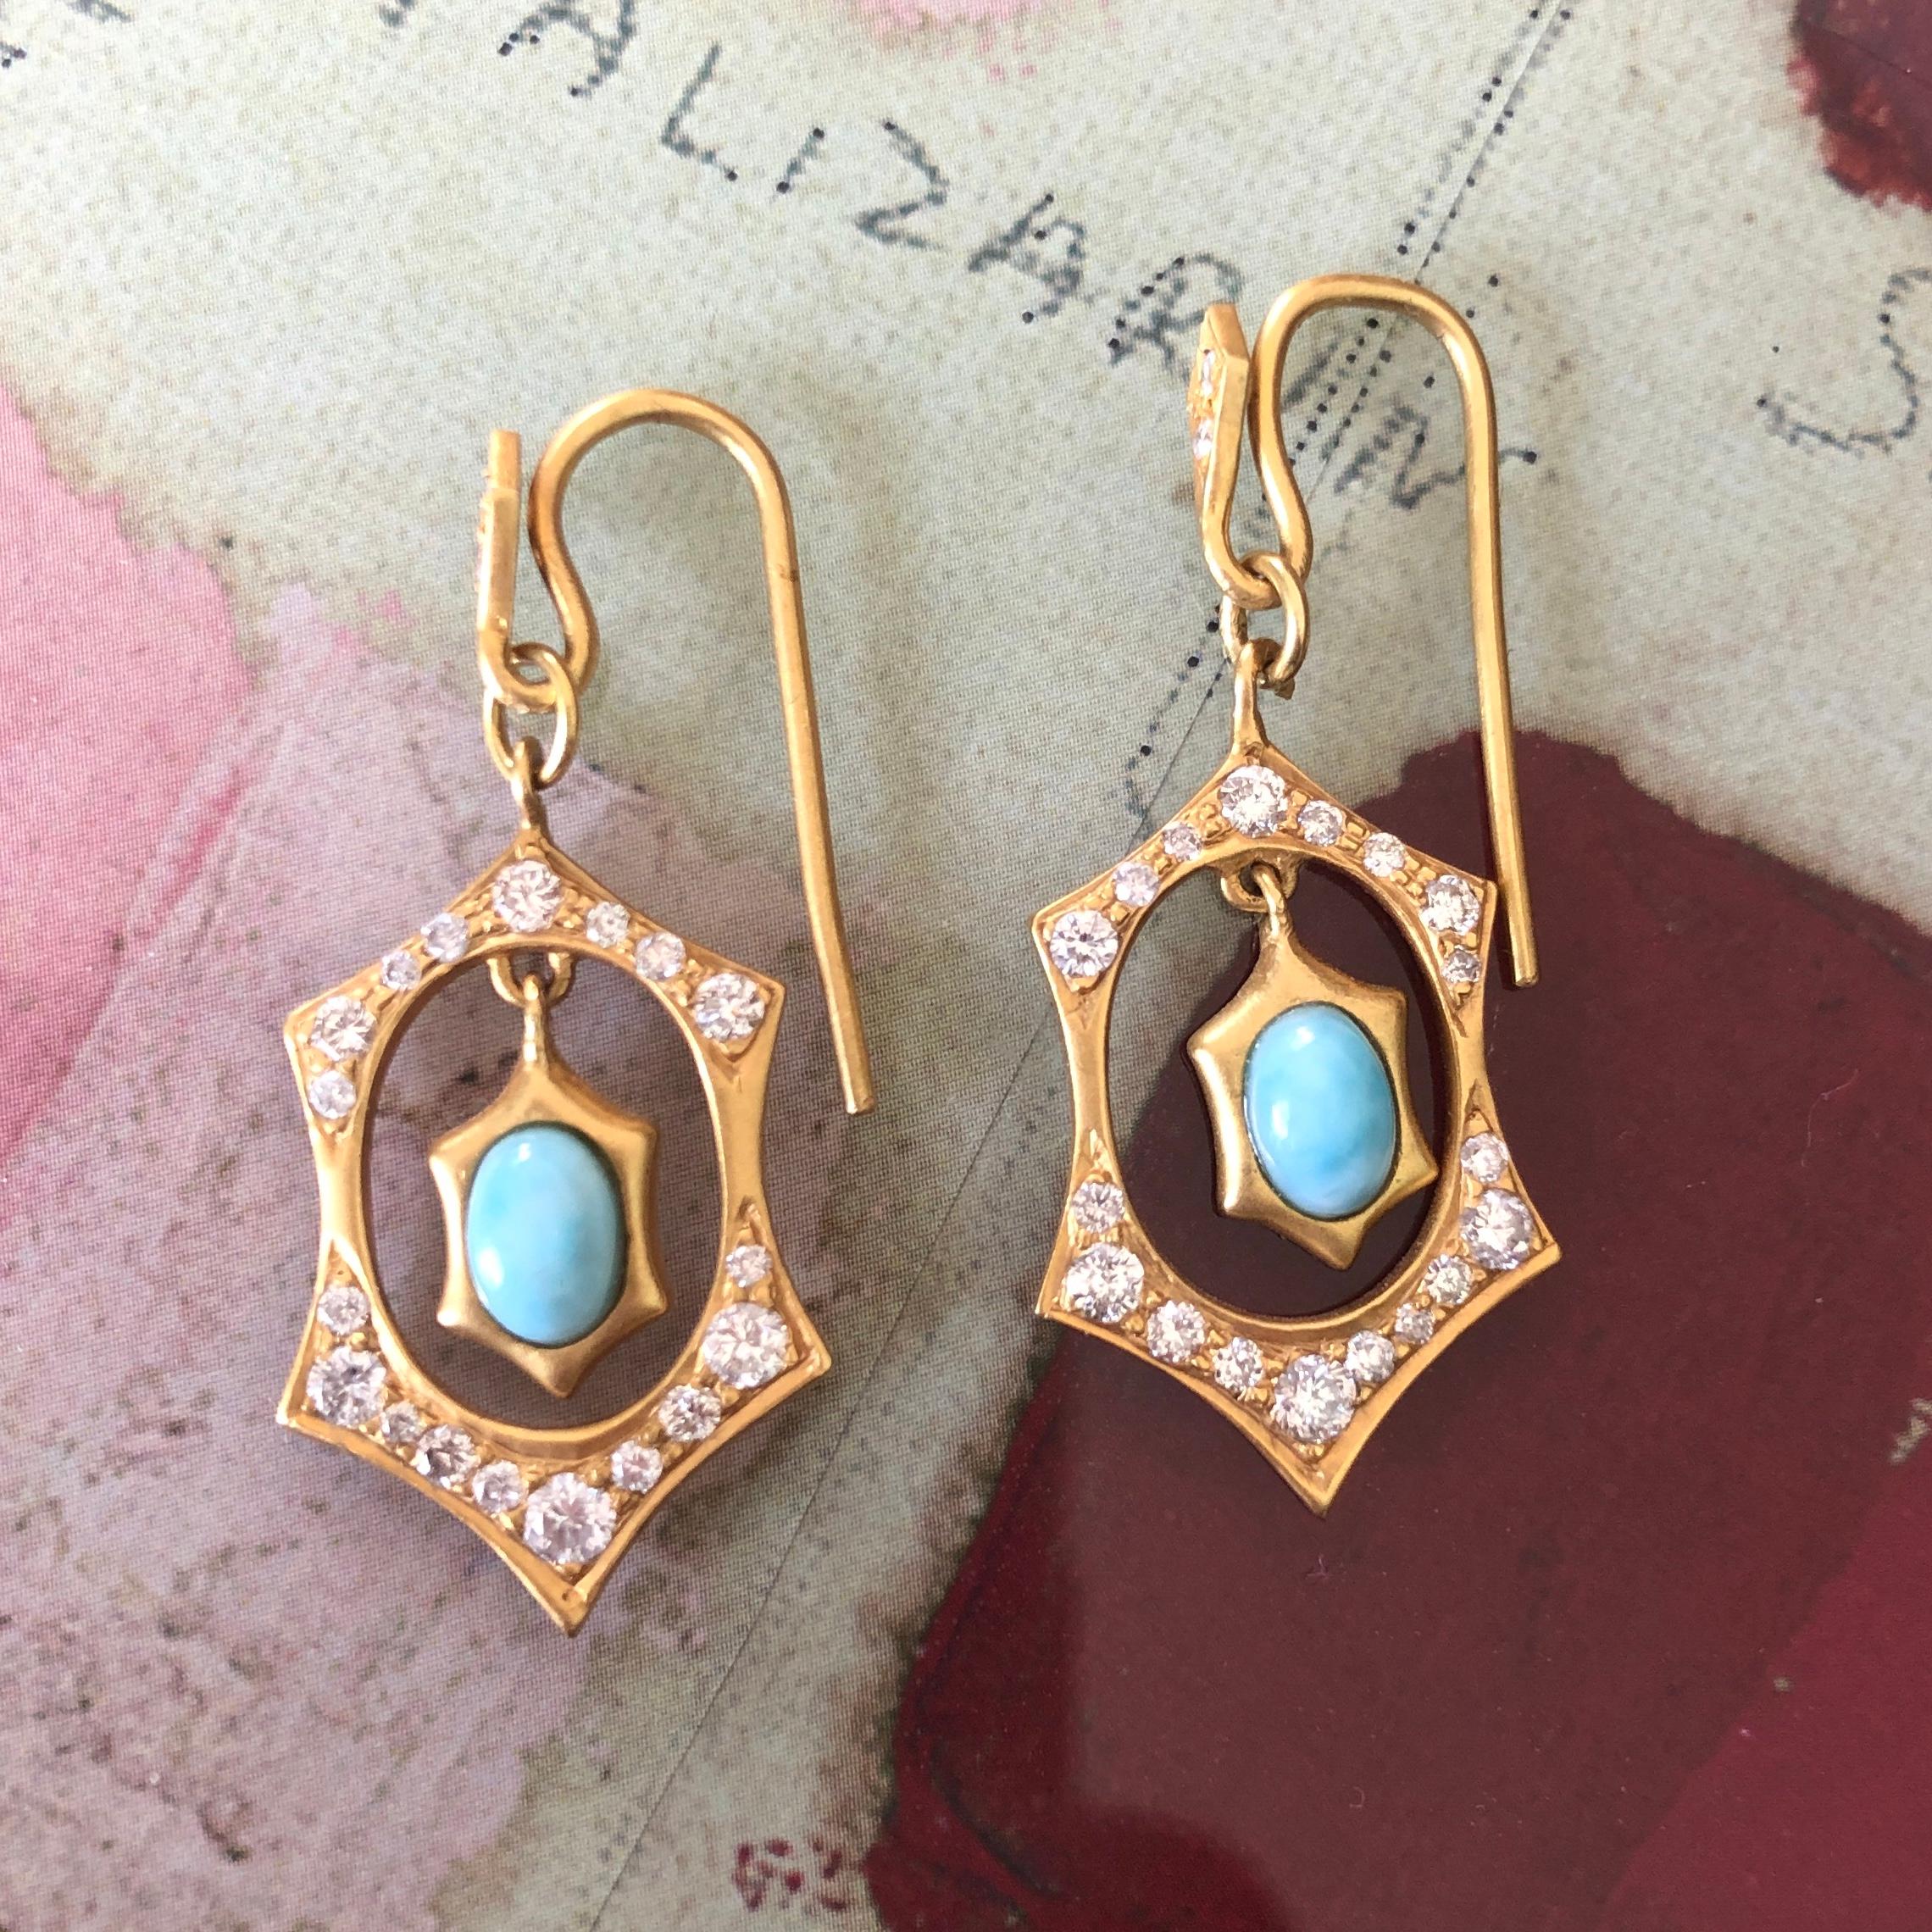 Brilliant Diamonds and bright Larimar ovals are set in these 18kt Gold Earrings by award winning jewelry designer, Lauren Harper.  The center stone, Larimar, has light turquoise color, and is a natural rare gemstone that is from the Dominican